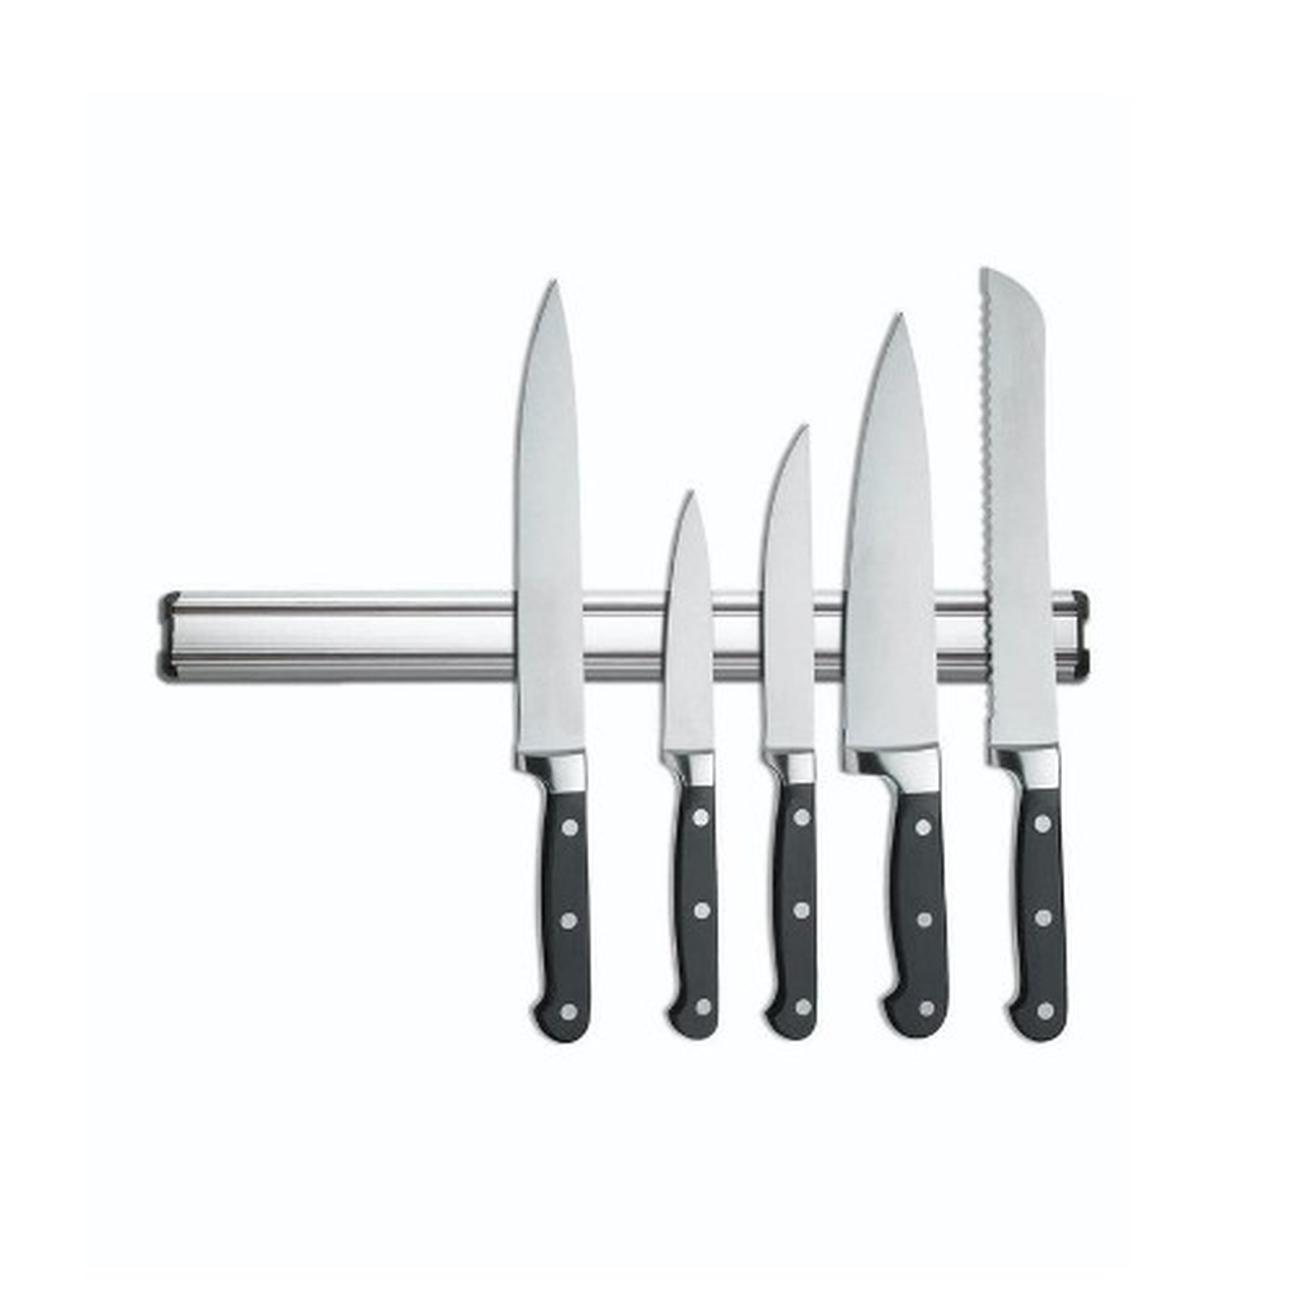 kitchencraft-deluxe-magnetic-knife-rack-30cm - KitchenCraft Deluxe Magnetic Knife Rack 30cm